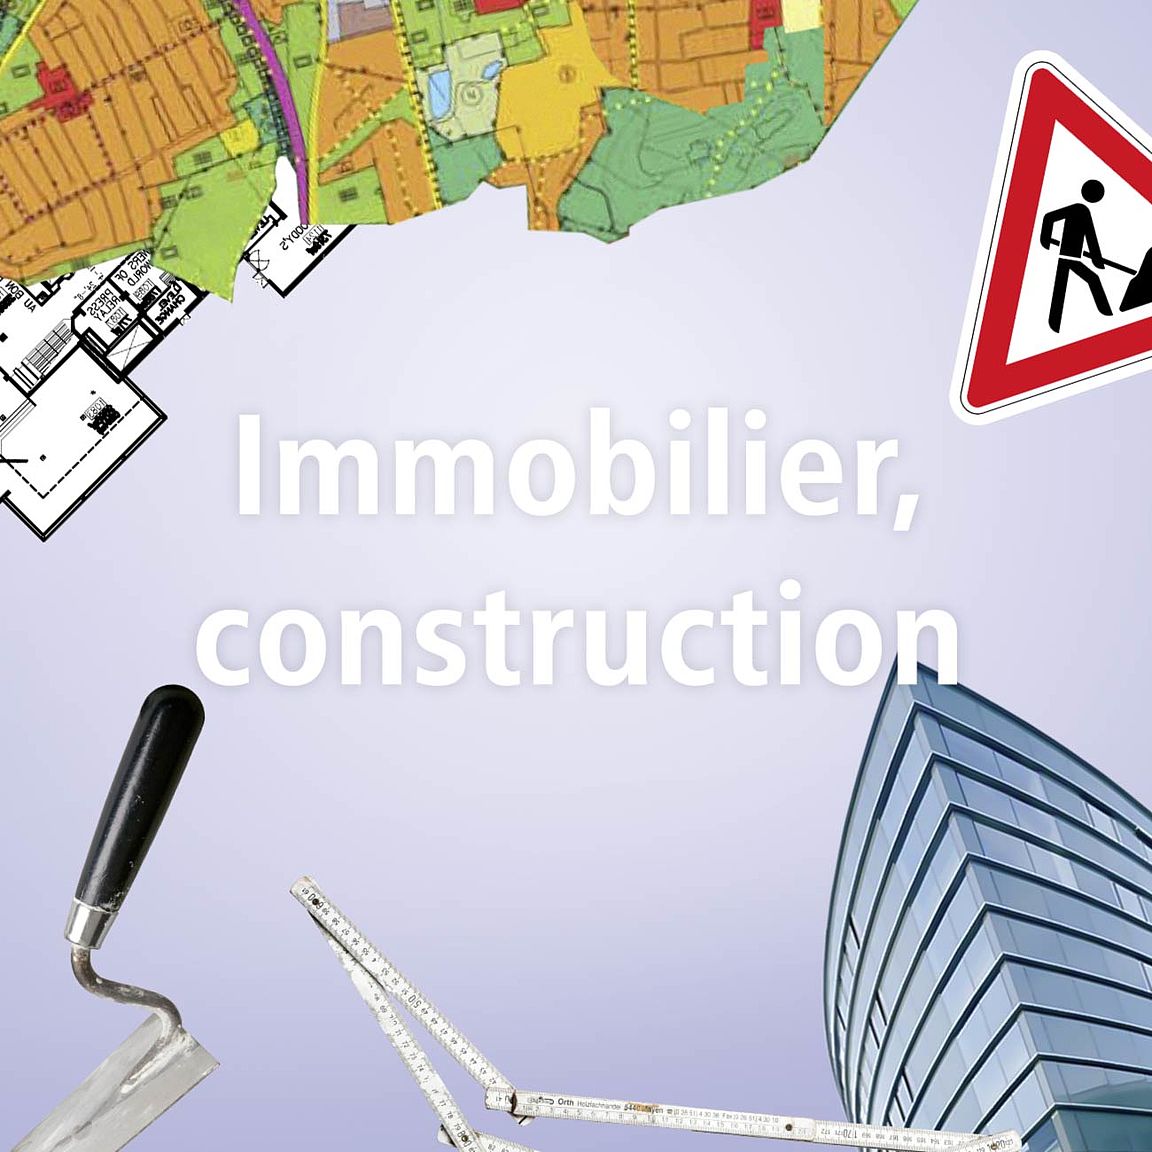 Immobilier, construction